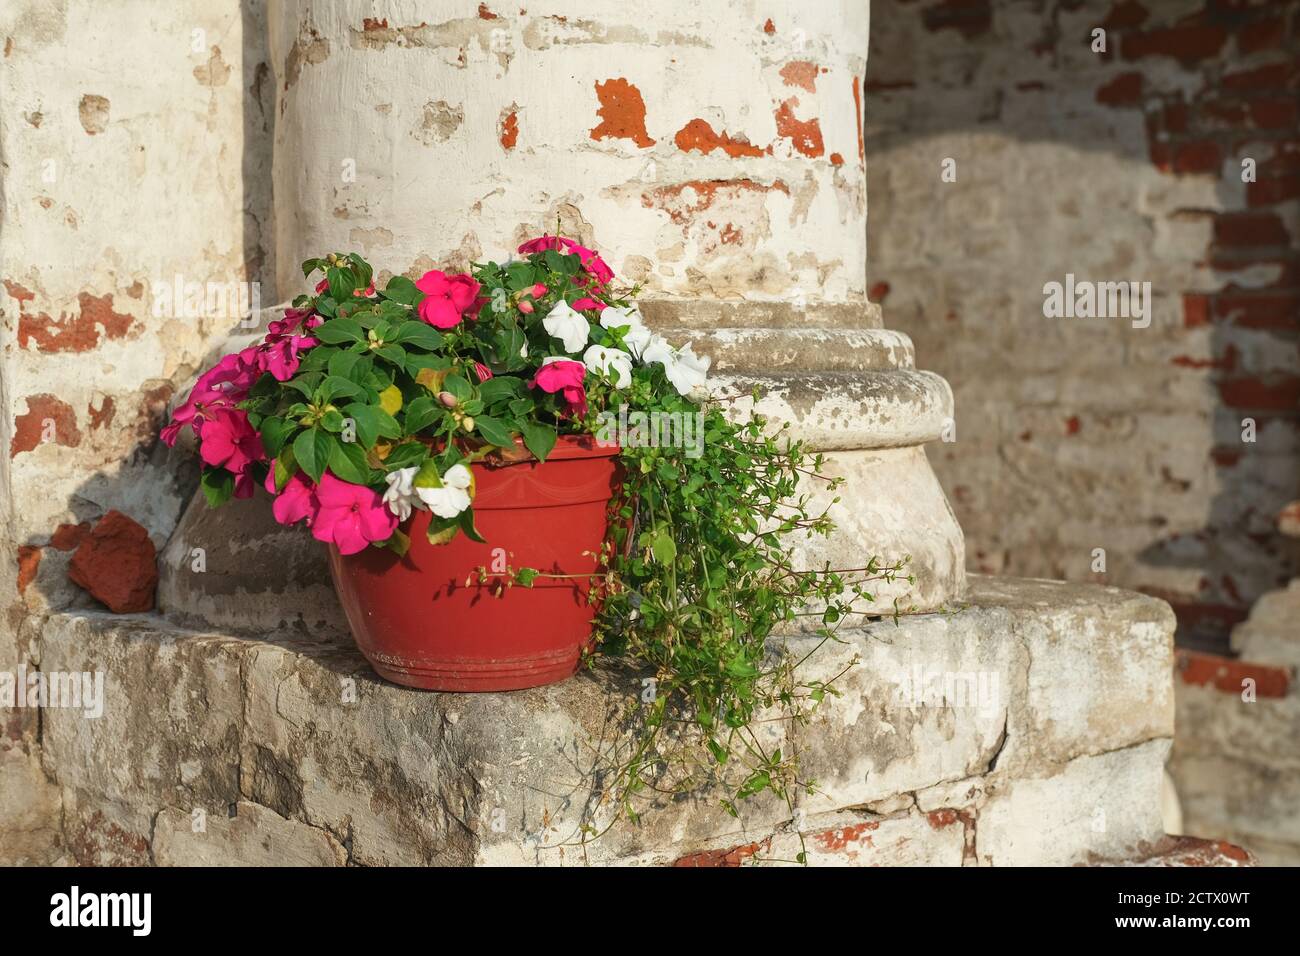 Flower Pot with red and white flowers of Balsaminaceae Impatiens under sunlight against backdrop of decayed brick column Stock Photo